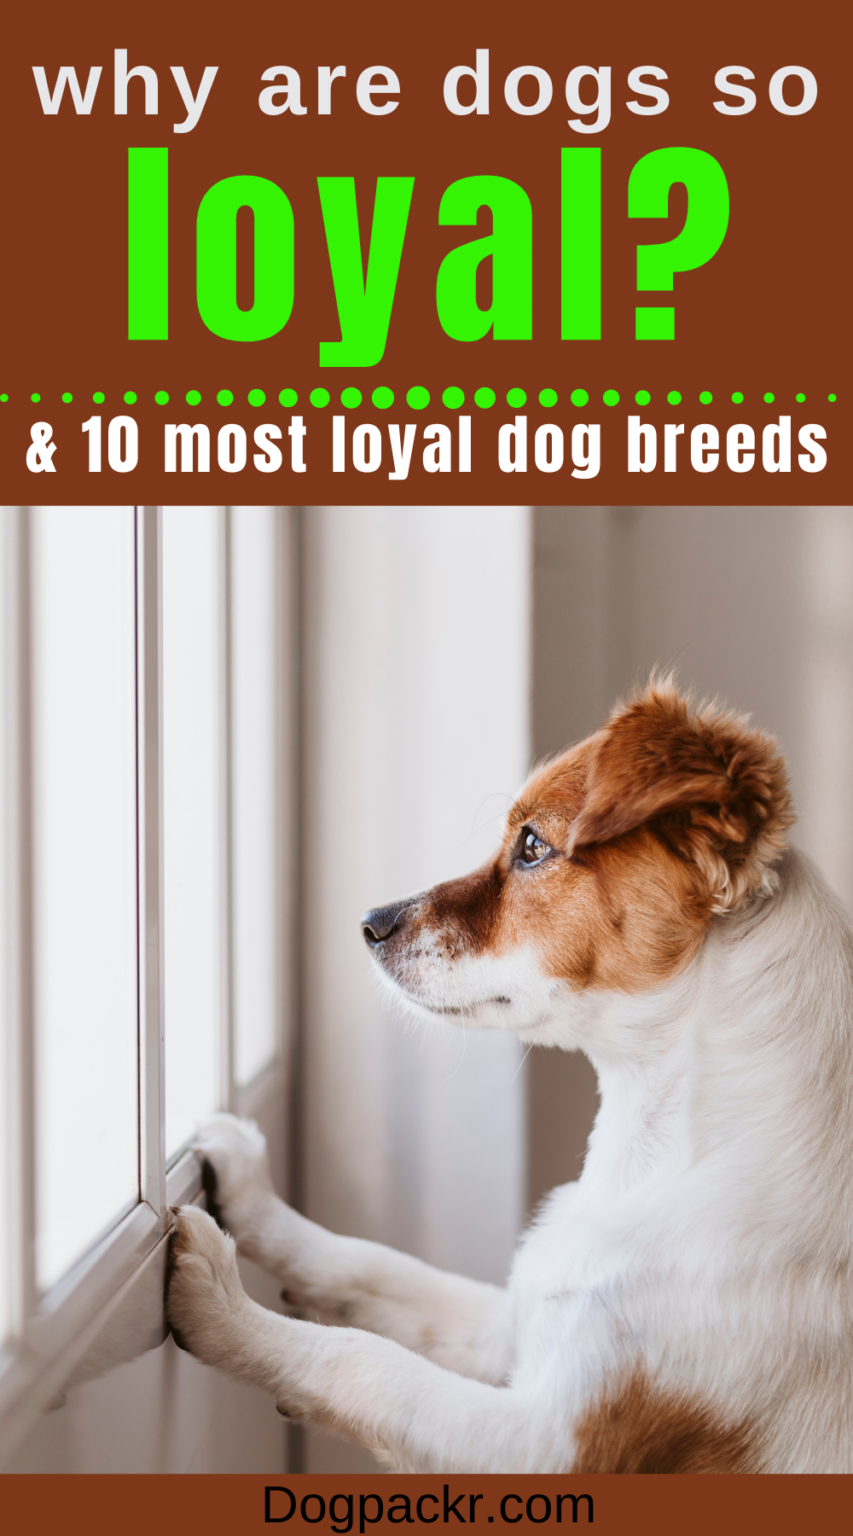 Why Are Dogs So Loyal?